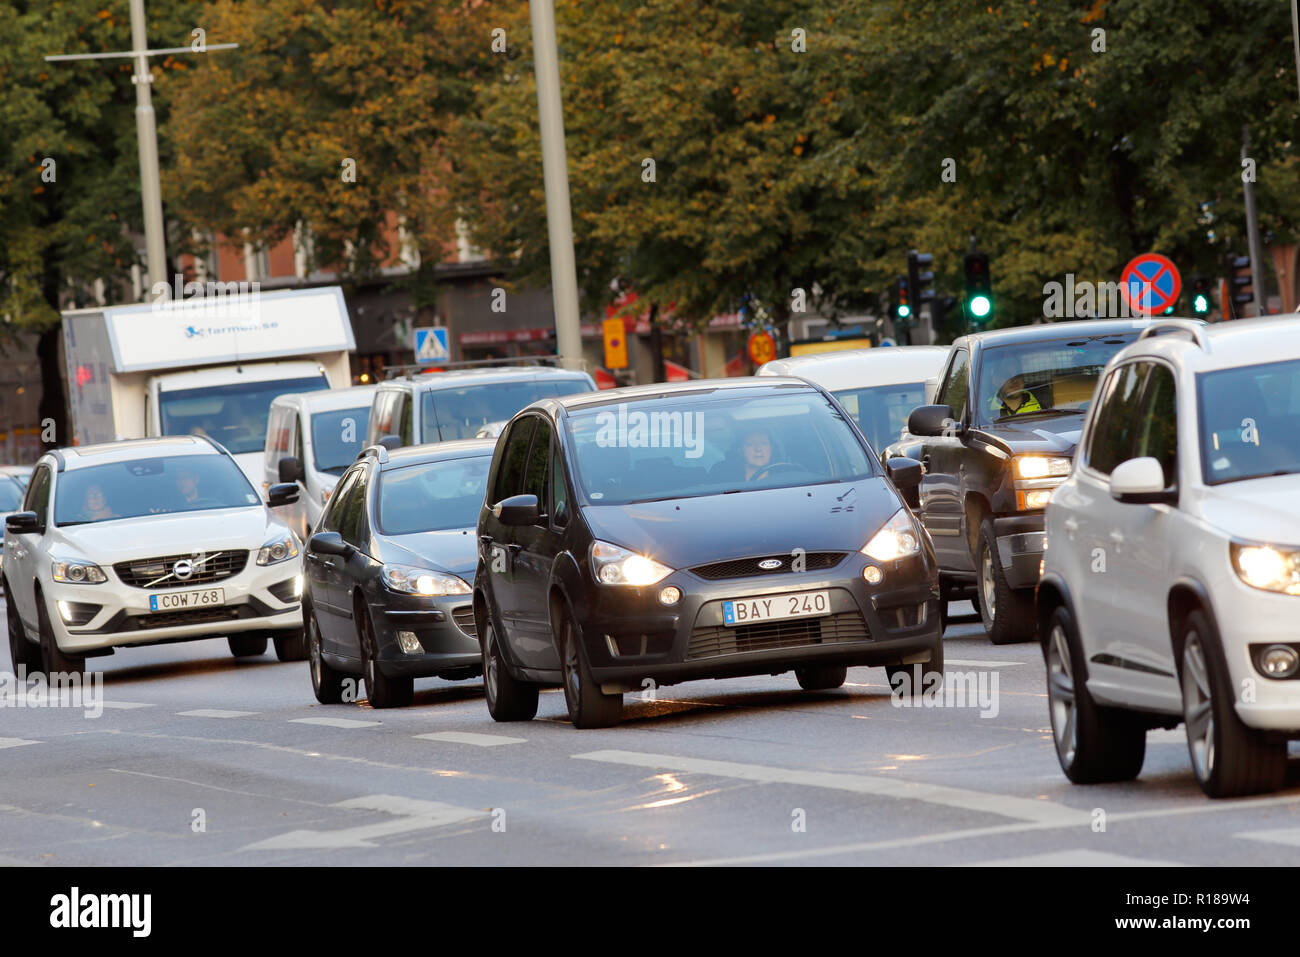 Stockholm, Sweden - October 7, 2015: Traffic at the Gotgatan street  at the Medborgarplatsen square located in the distrct of Sodermalm. Stock Photo